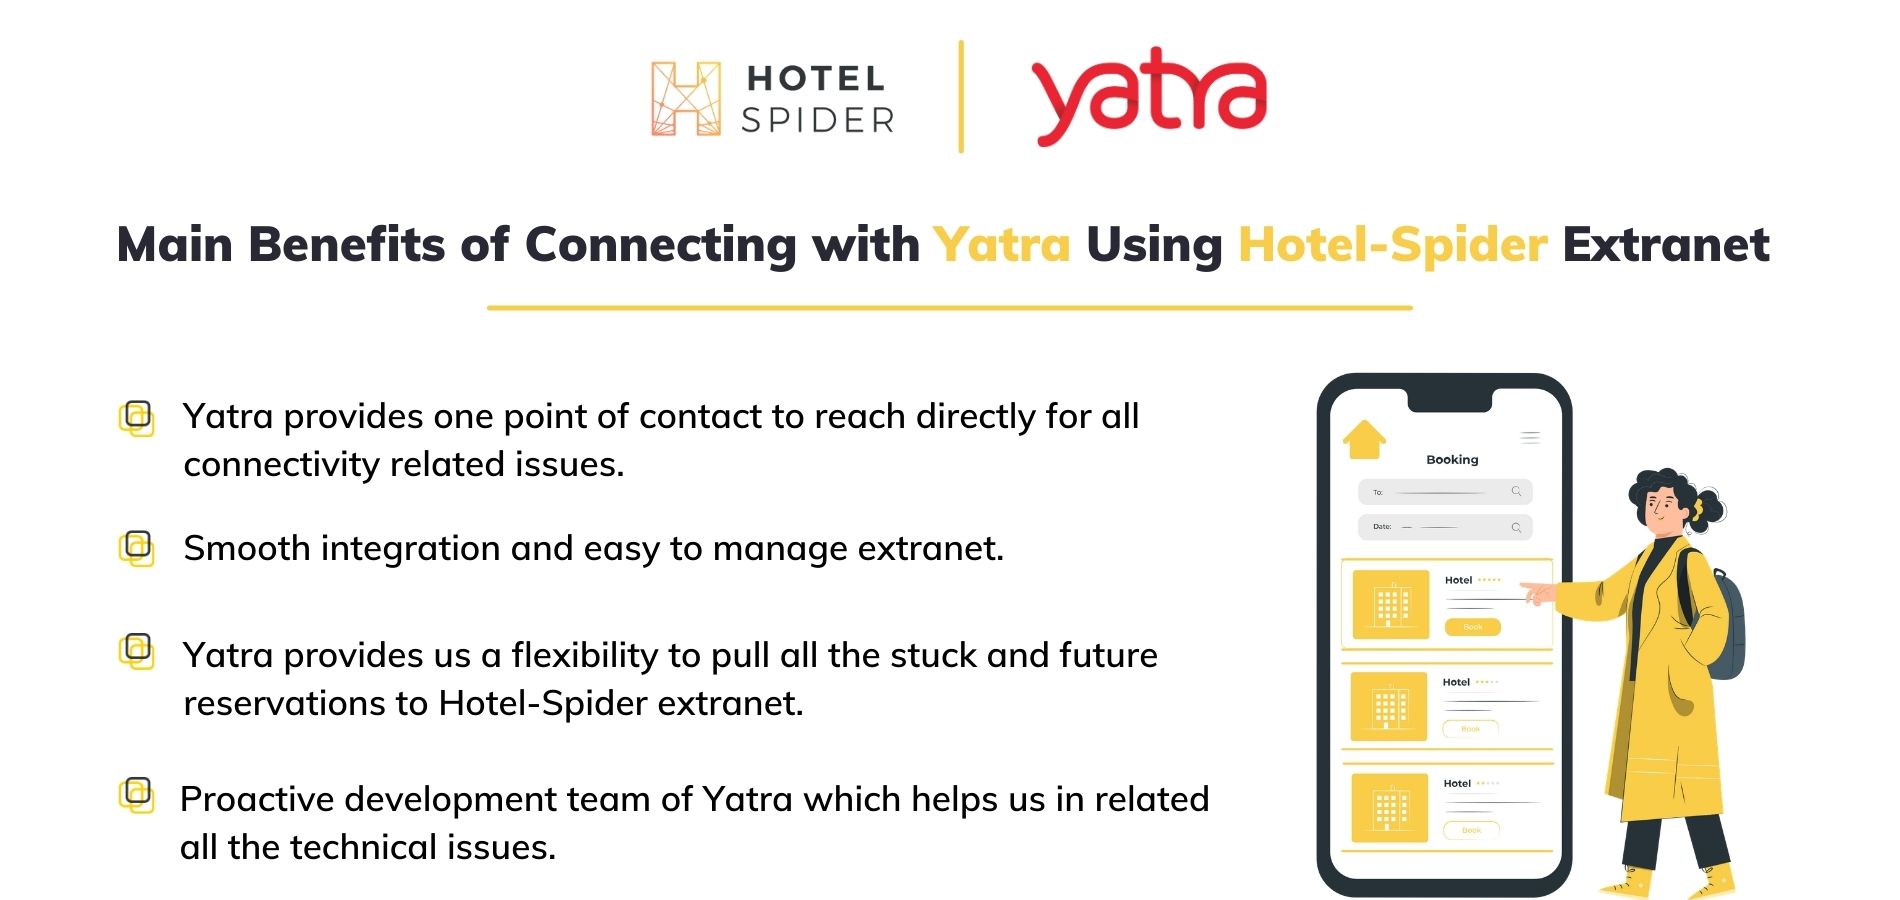 Benefits of connecting with Yatra using Hotel-Spider